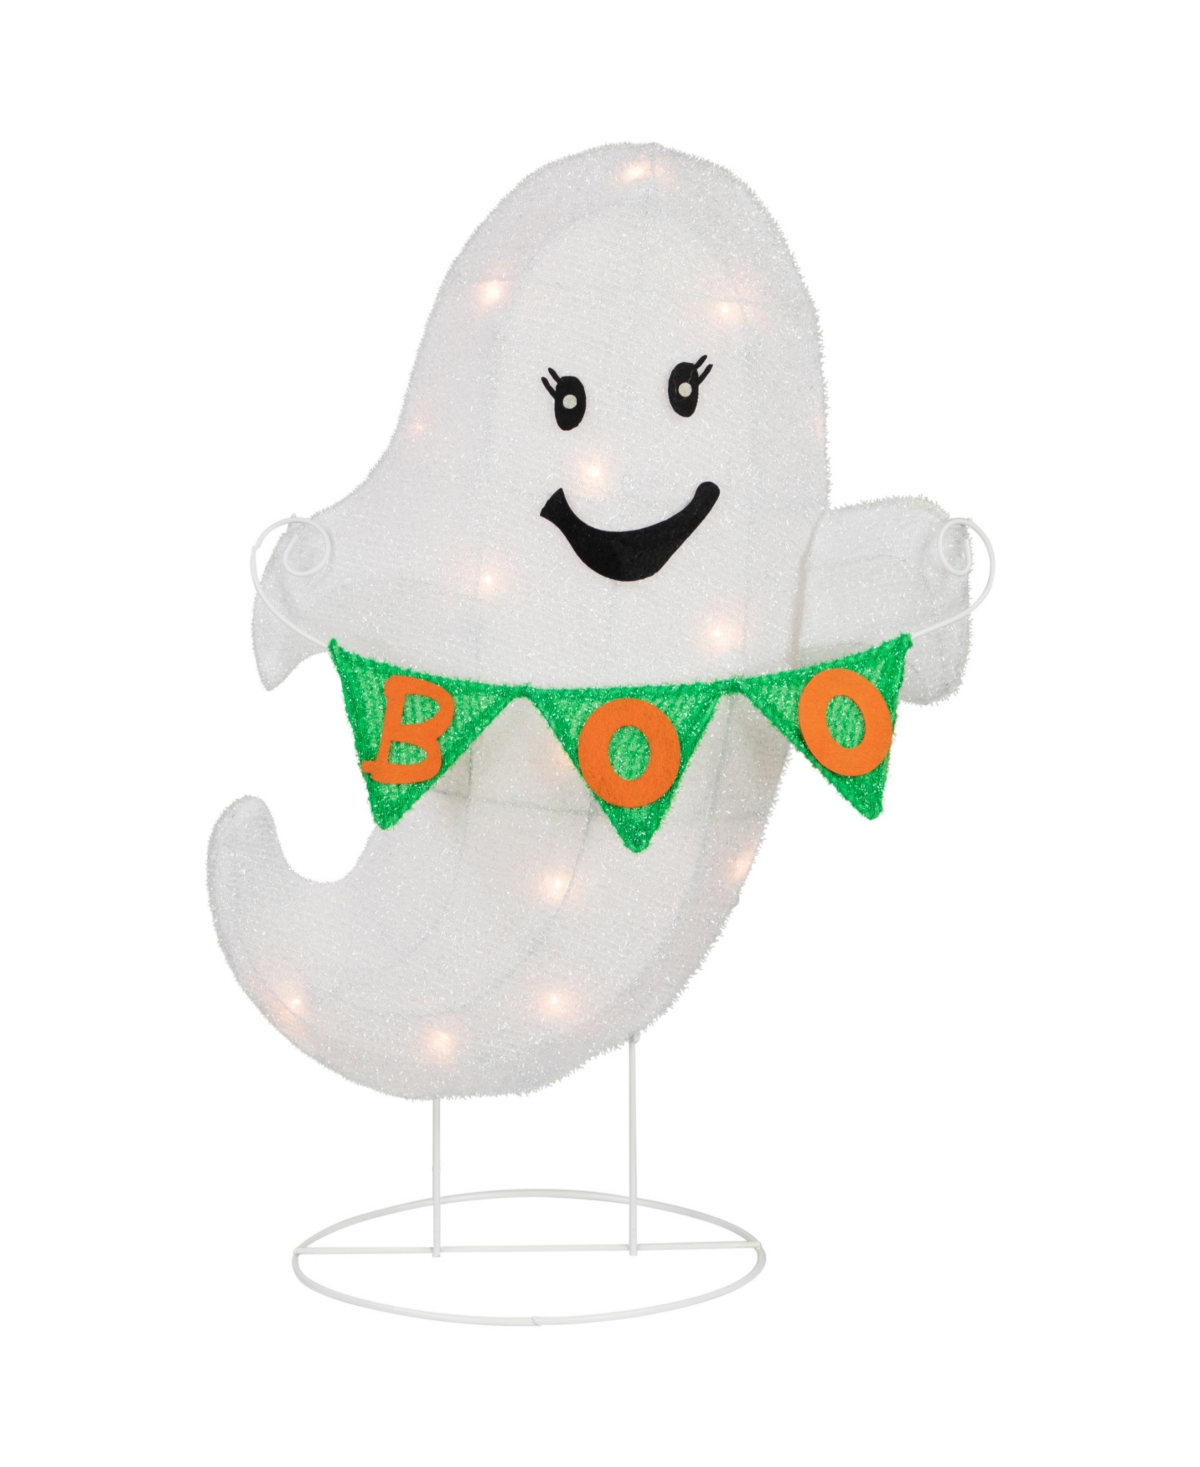 25" Lighted Led White Ghost with "Boo" Banner Halloween Yard Decoration - White